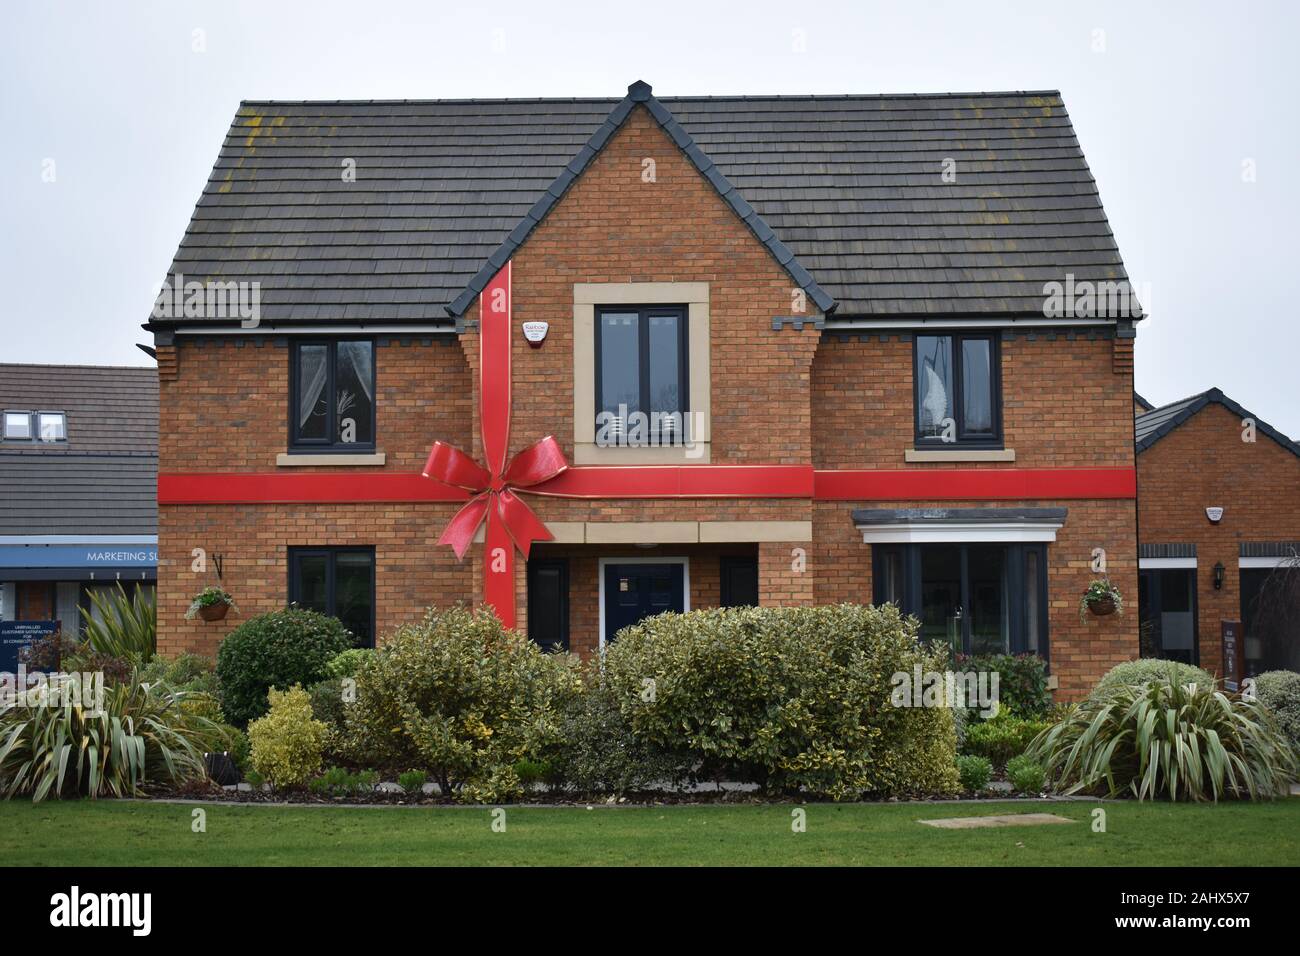 This is a new house built by David Wilson Homes at Fairfields in Milton Keynes, which has been gift wrapped. Stock Photo